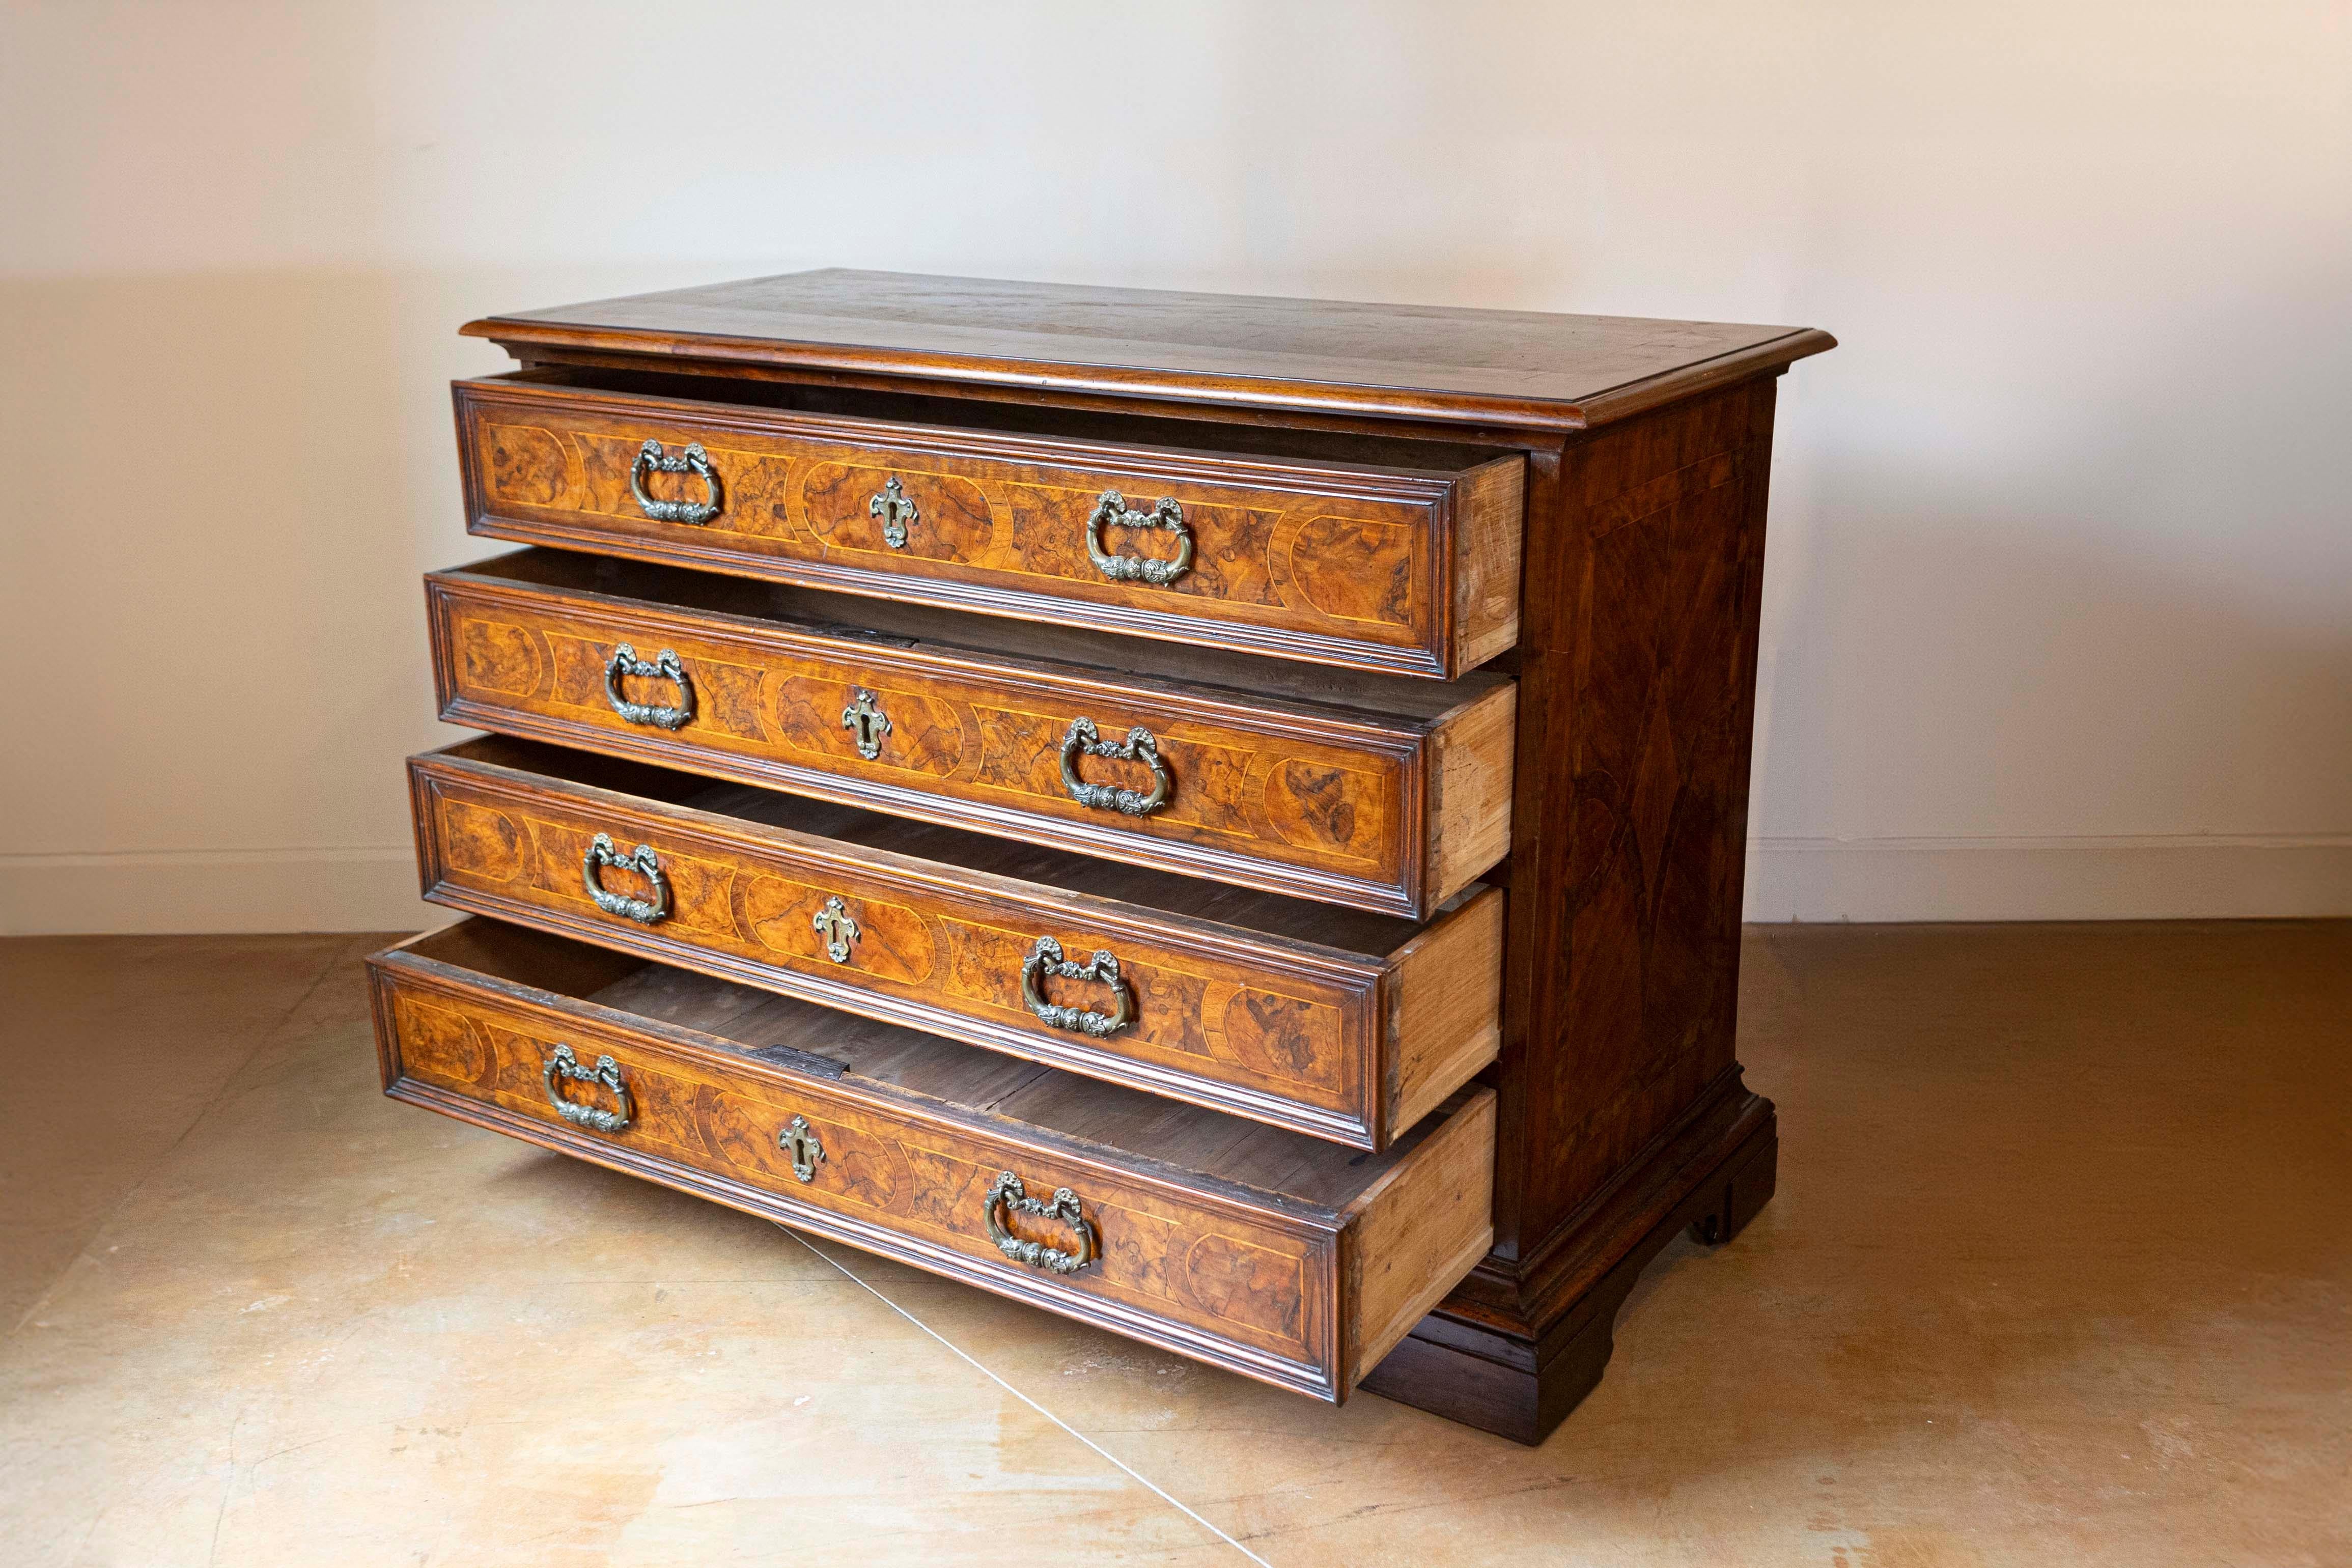 18th Century Italian Walnut Commode with Four Drawers and Ornate Hardware In Good Condition For Sale In Atlanta, GA